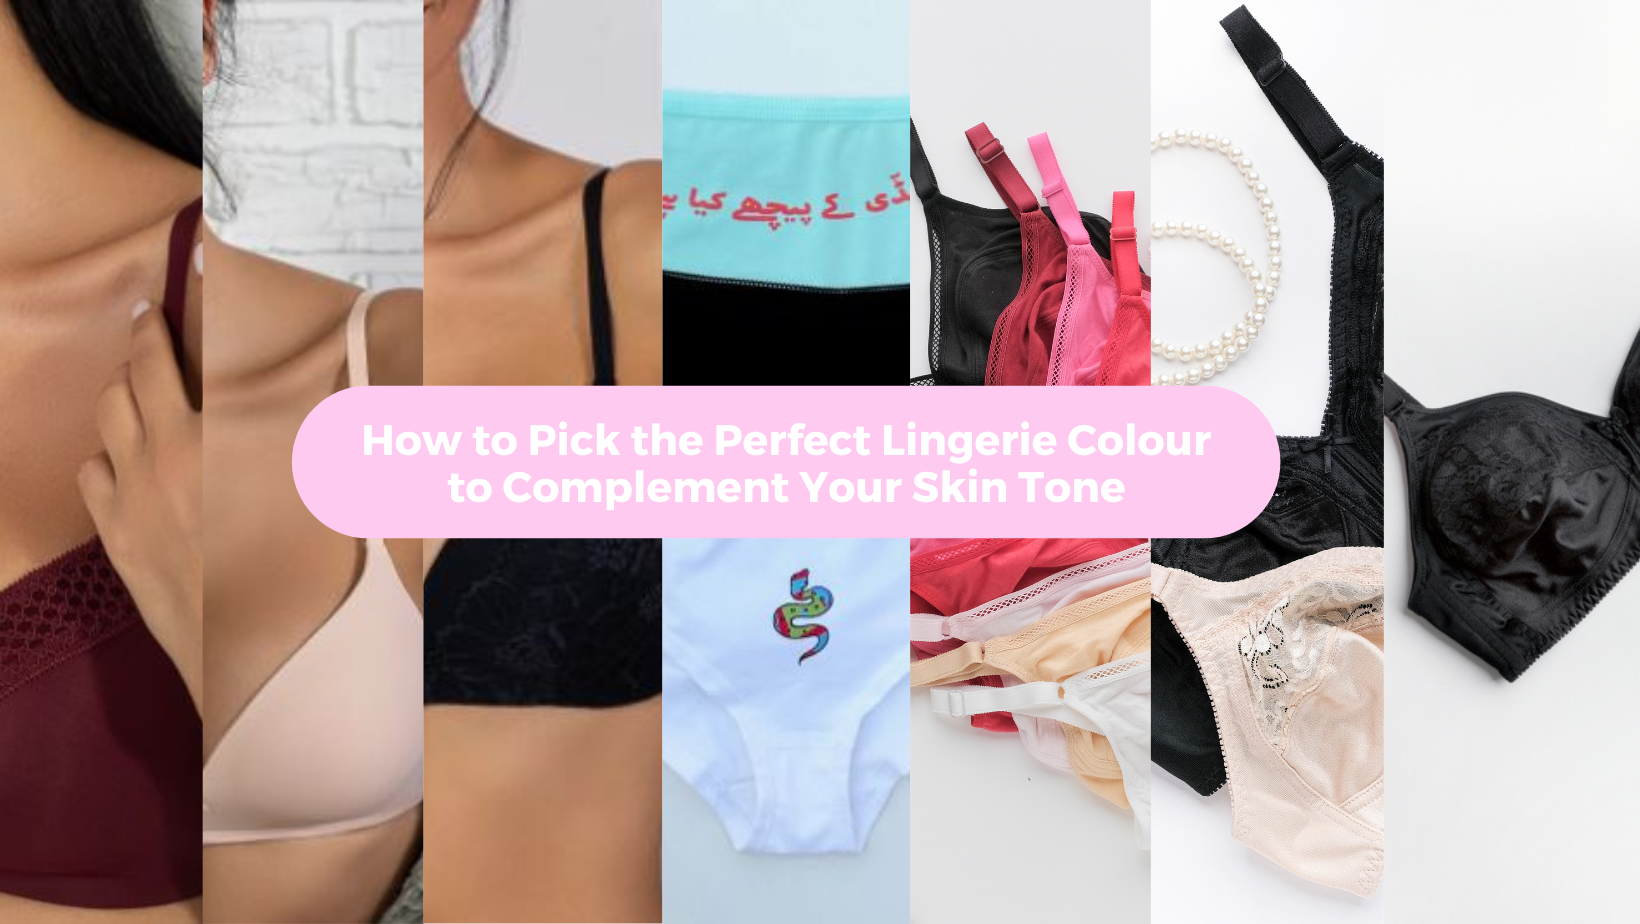 How to Select The Perfect Color of Lingerie